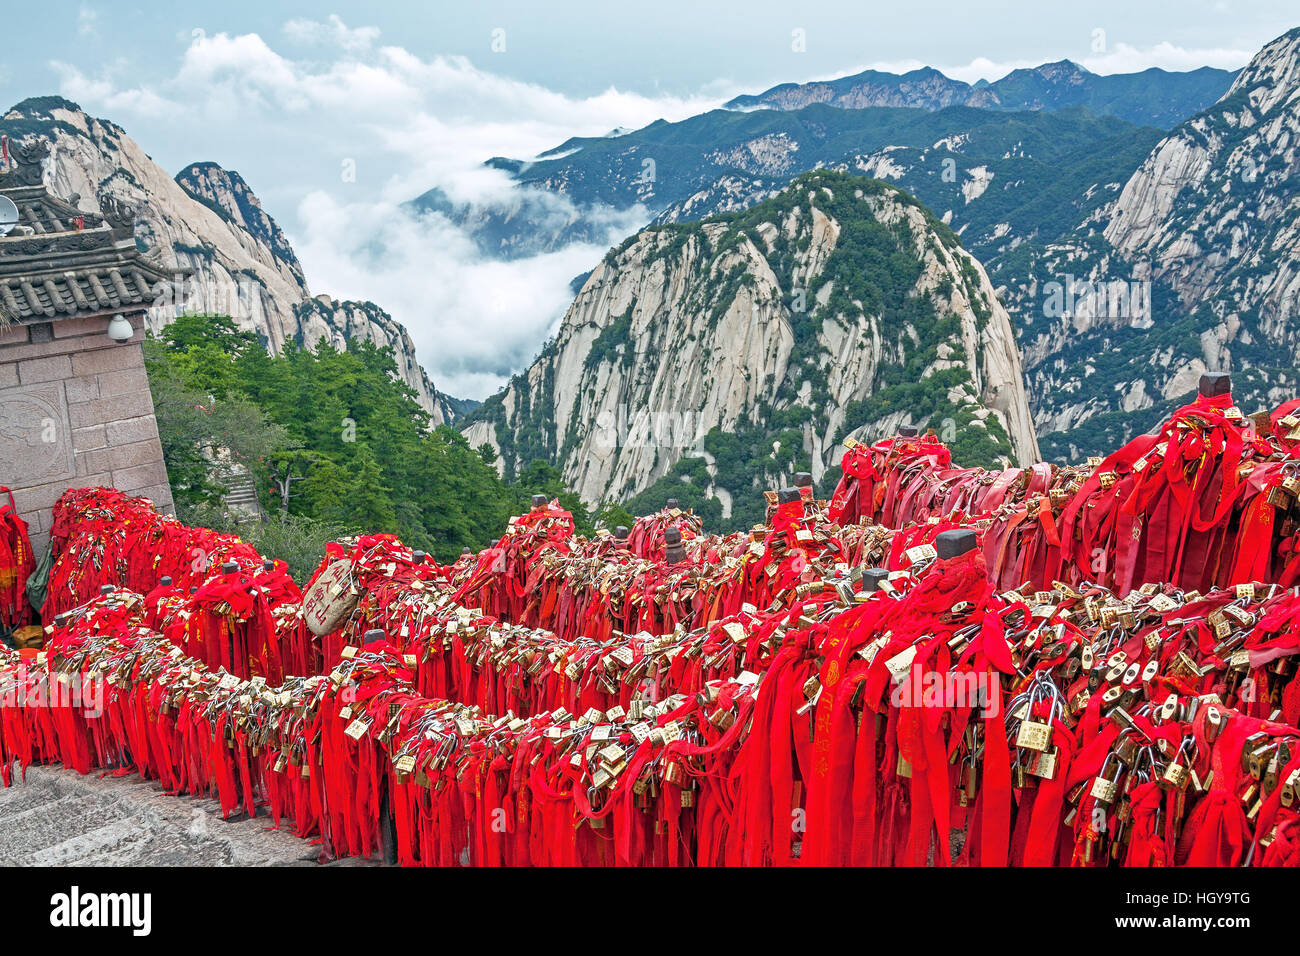 Majestic Huashan mountains with memorable red ribbons and traditional padlocks of lovers people in Huashan mountains, China Stock Photo